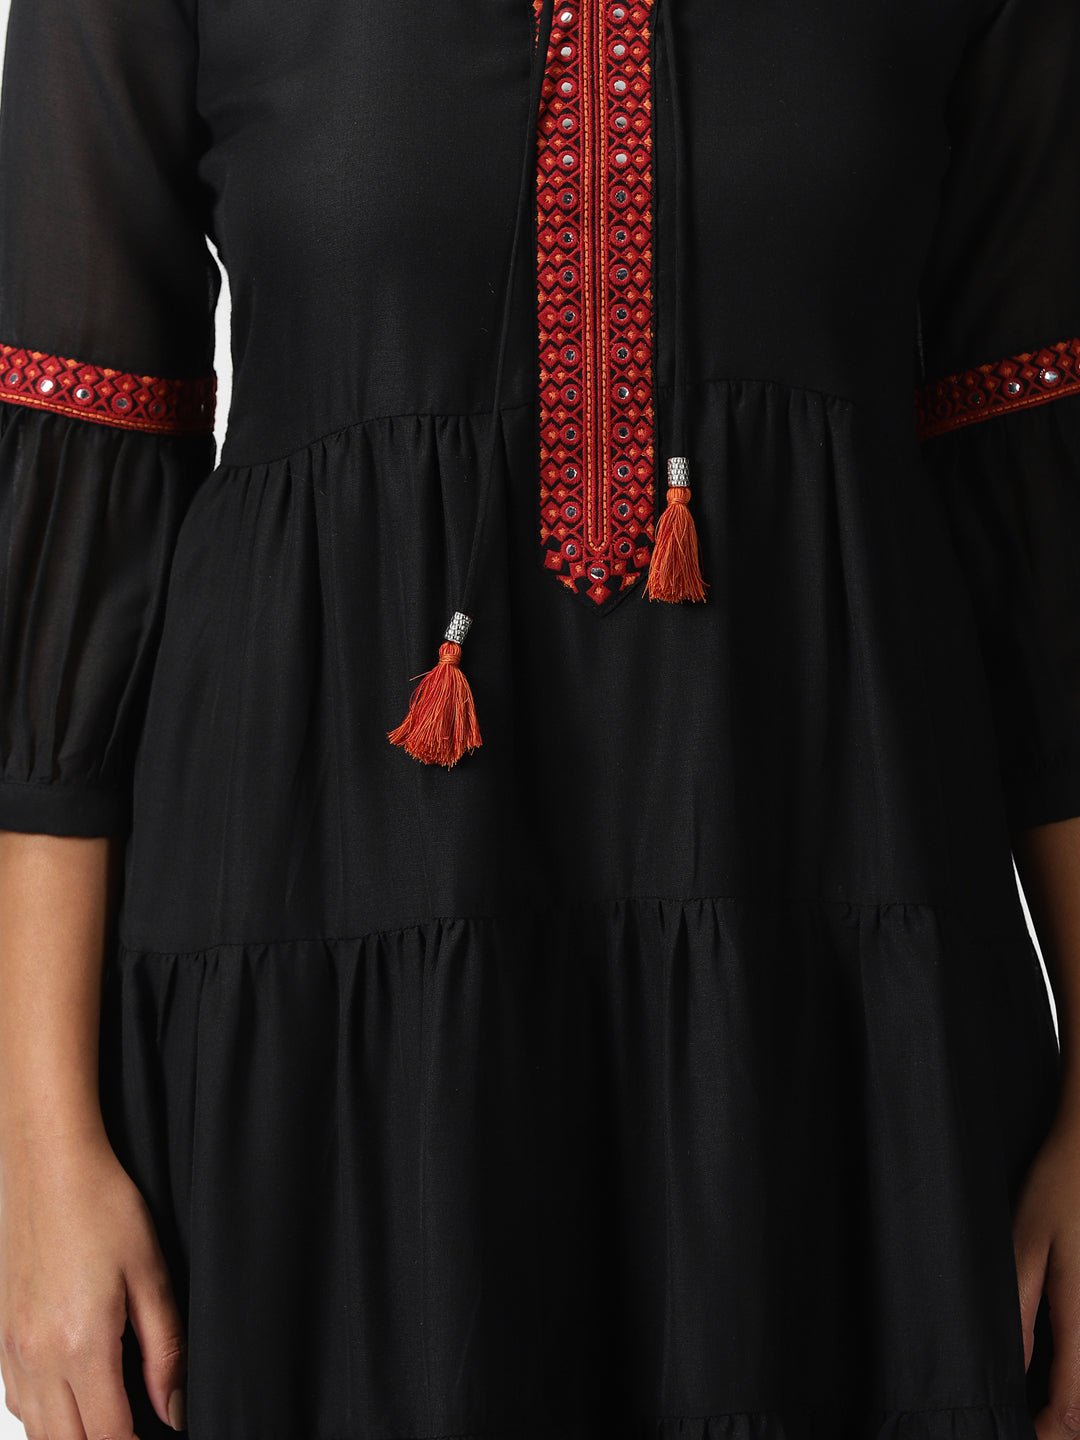 Black Boho Tiered Midi Dress with Embroidered Details